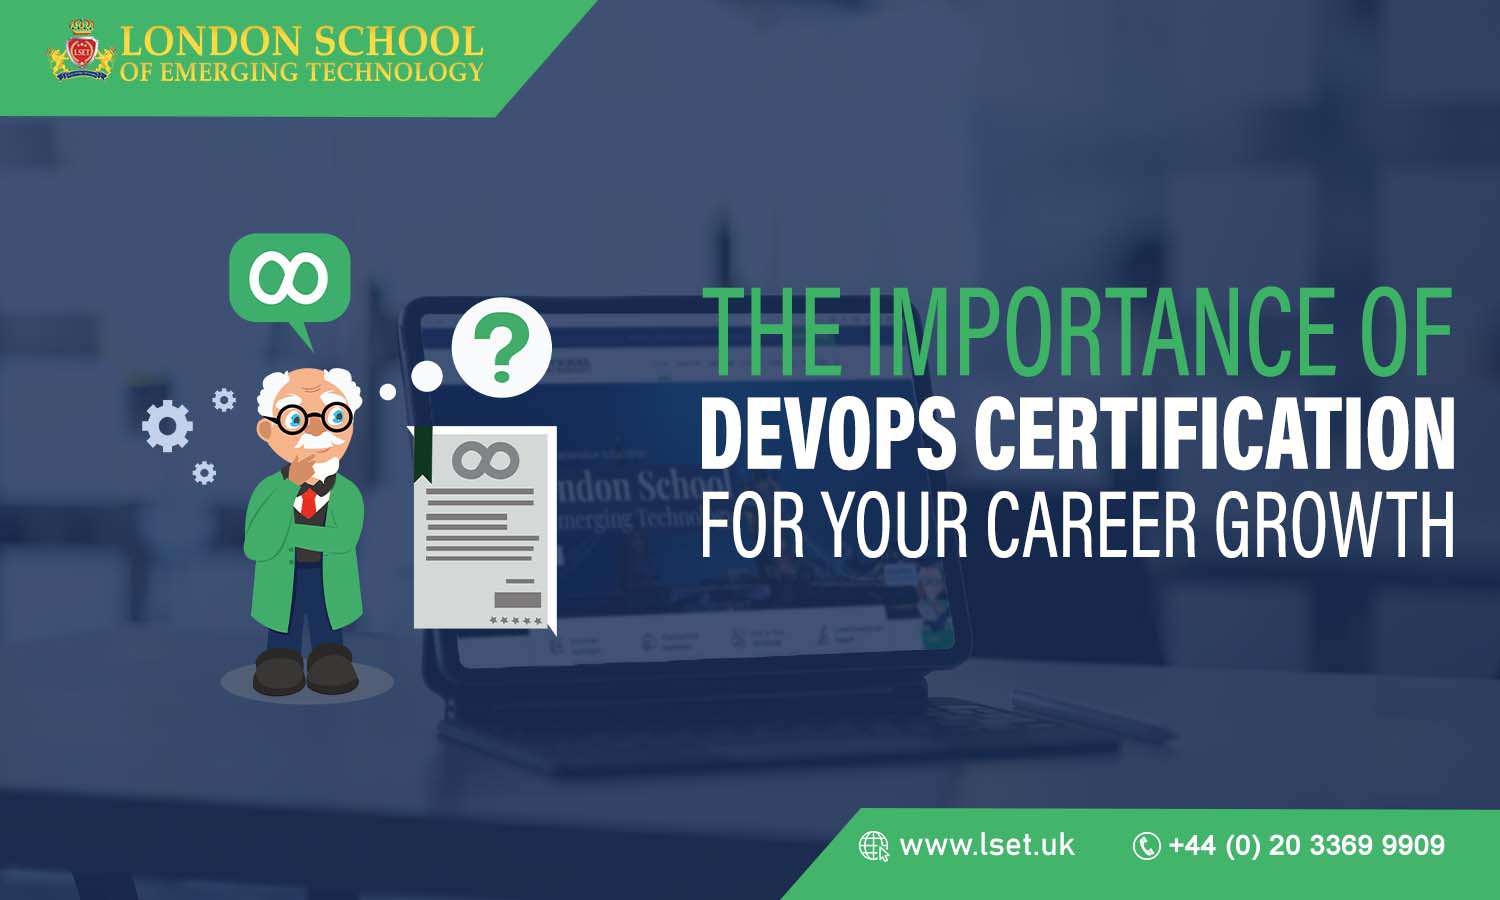 The Importance of DevOps Certification for Your Career Growth